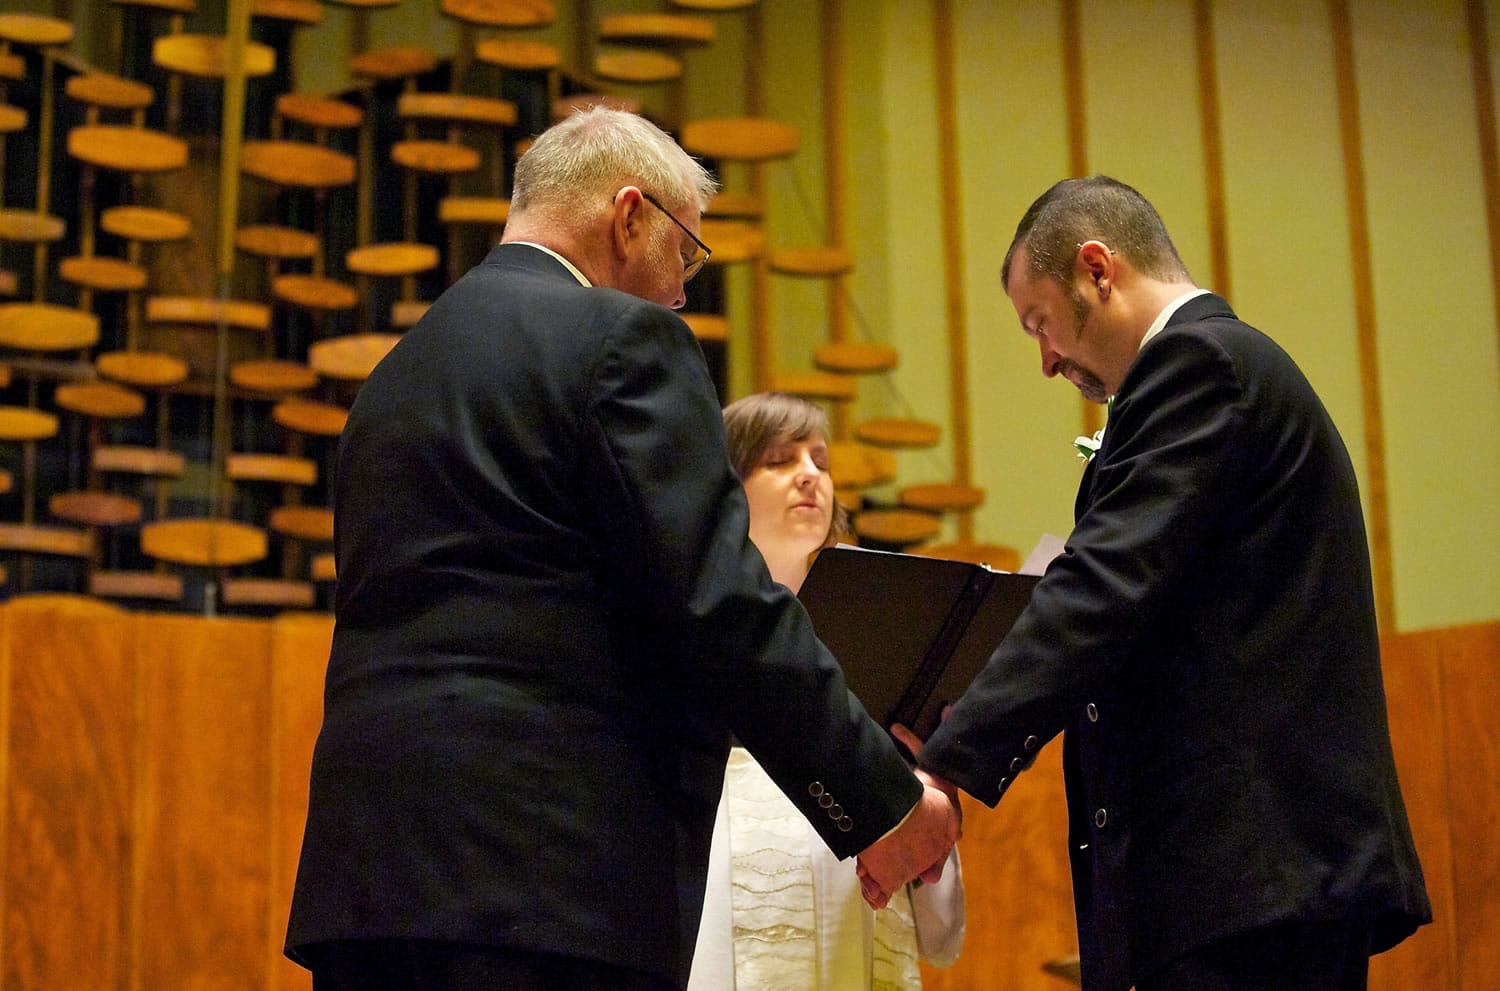 Portlanders and committed United Church of Christ members Jim McPartland, left, and Grant Edwards were wed on Nov. 9 at the First Congregational United Church of Christ in Hazel Dell. The Rev.